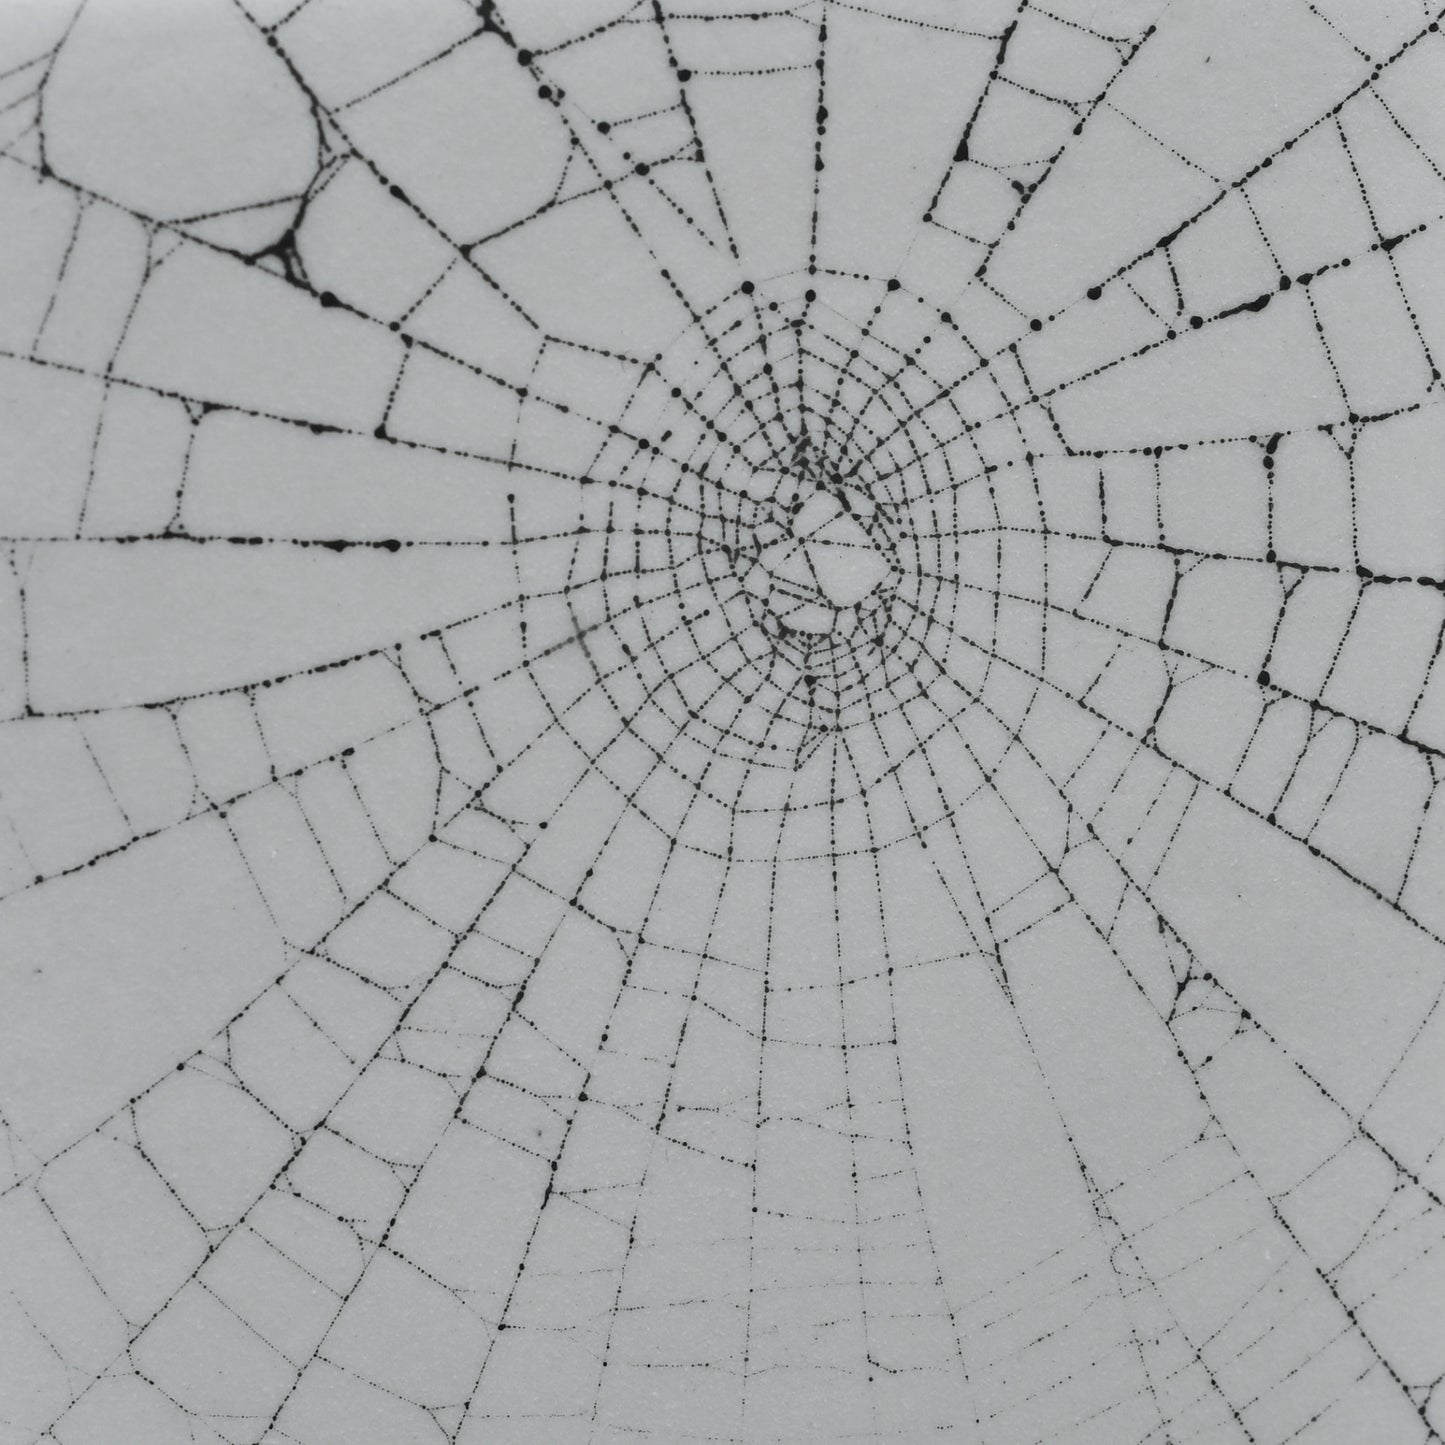 Web on Clay (138), Collected August 31, 2022